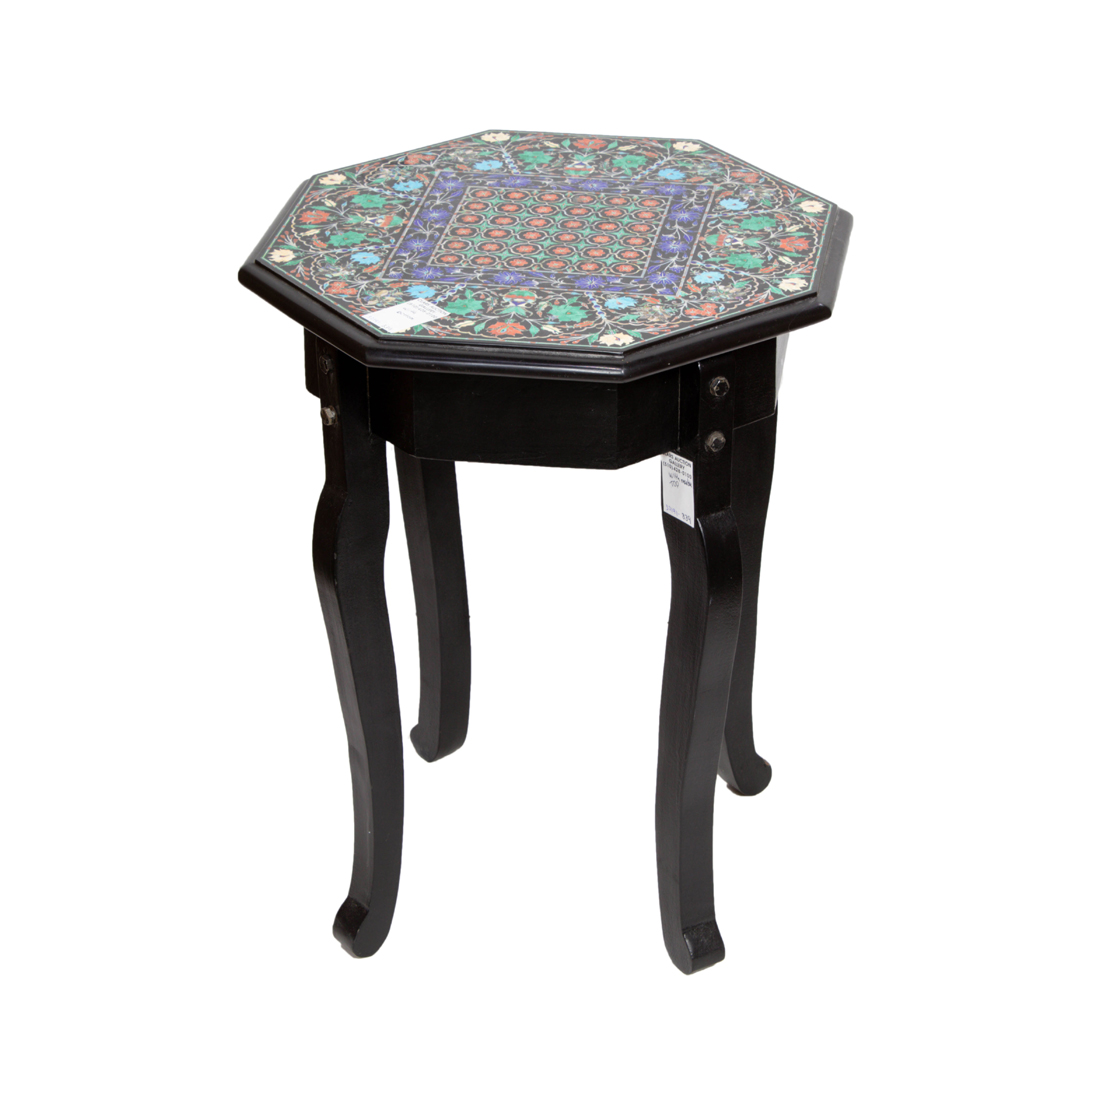 A MOROCCAN STYLE INLAID OCCASIONAL